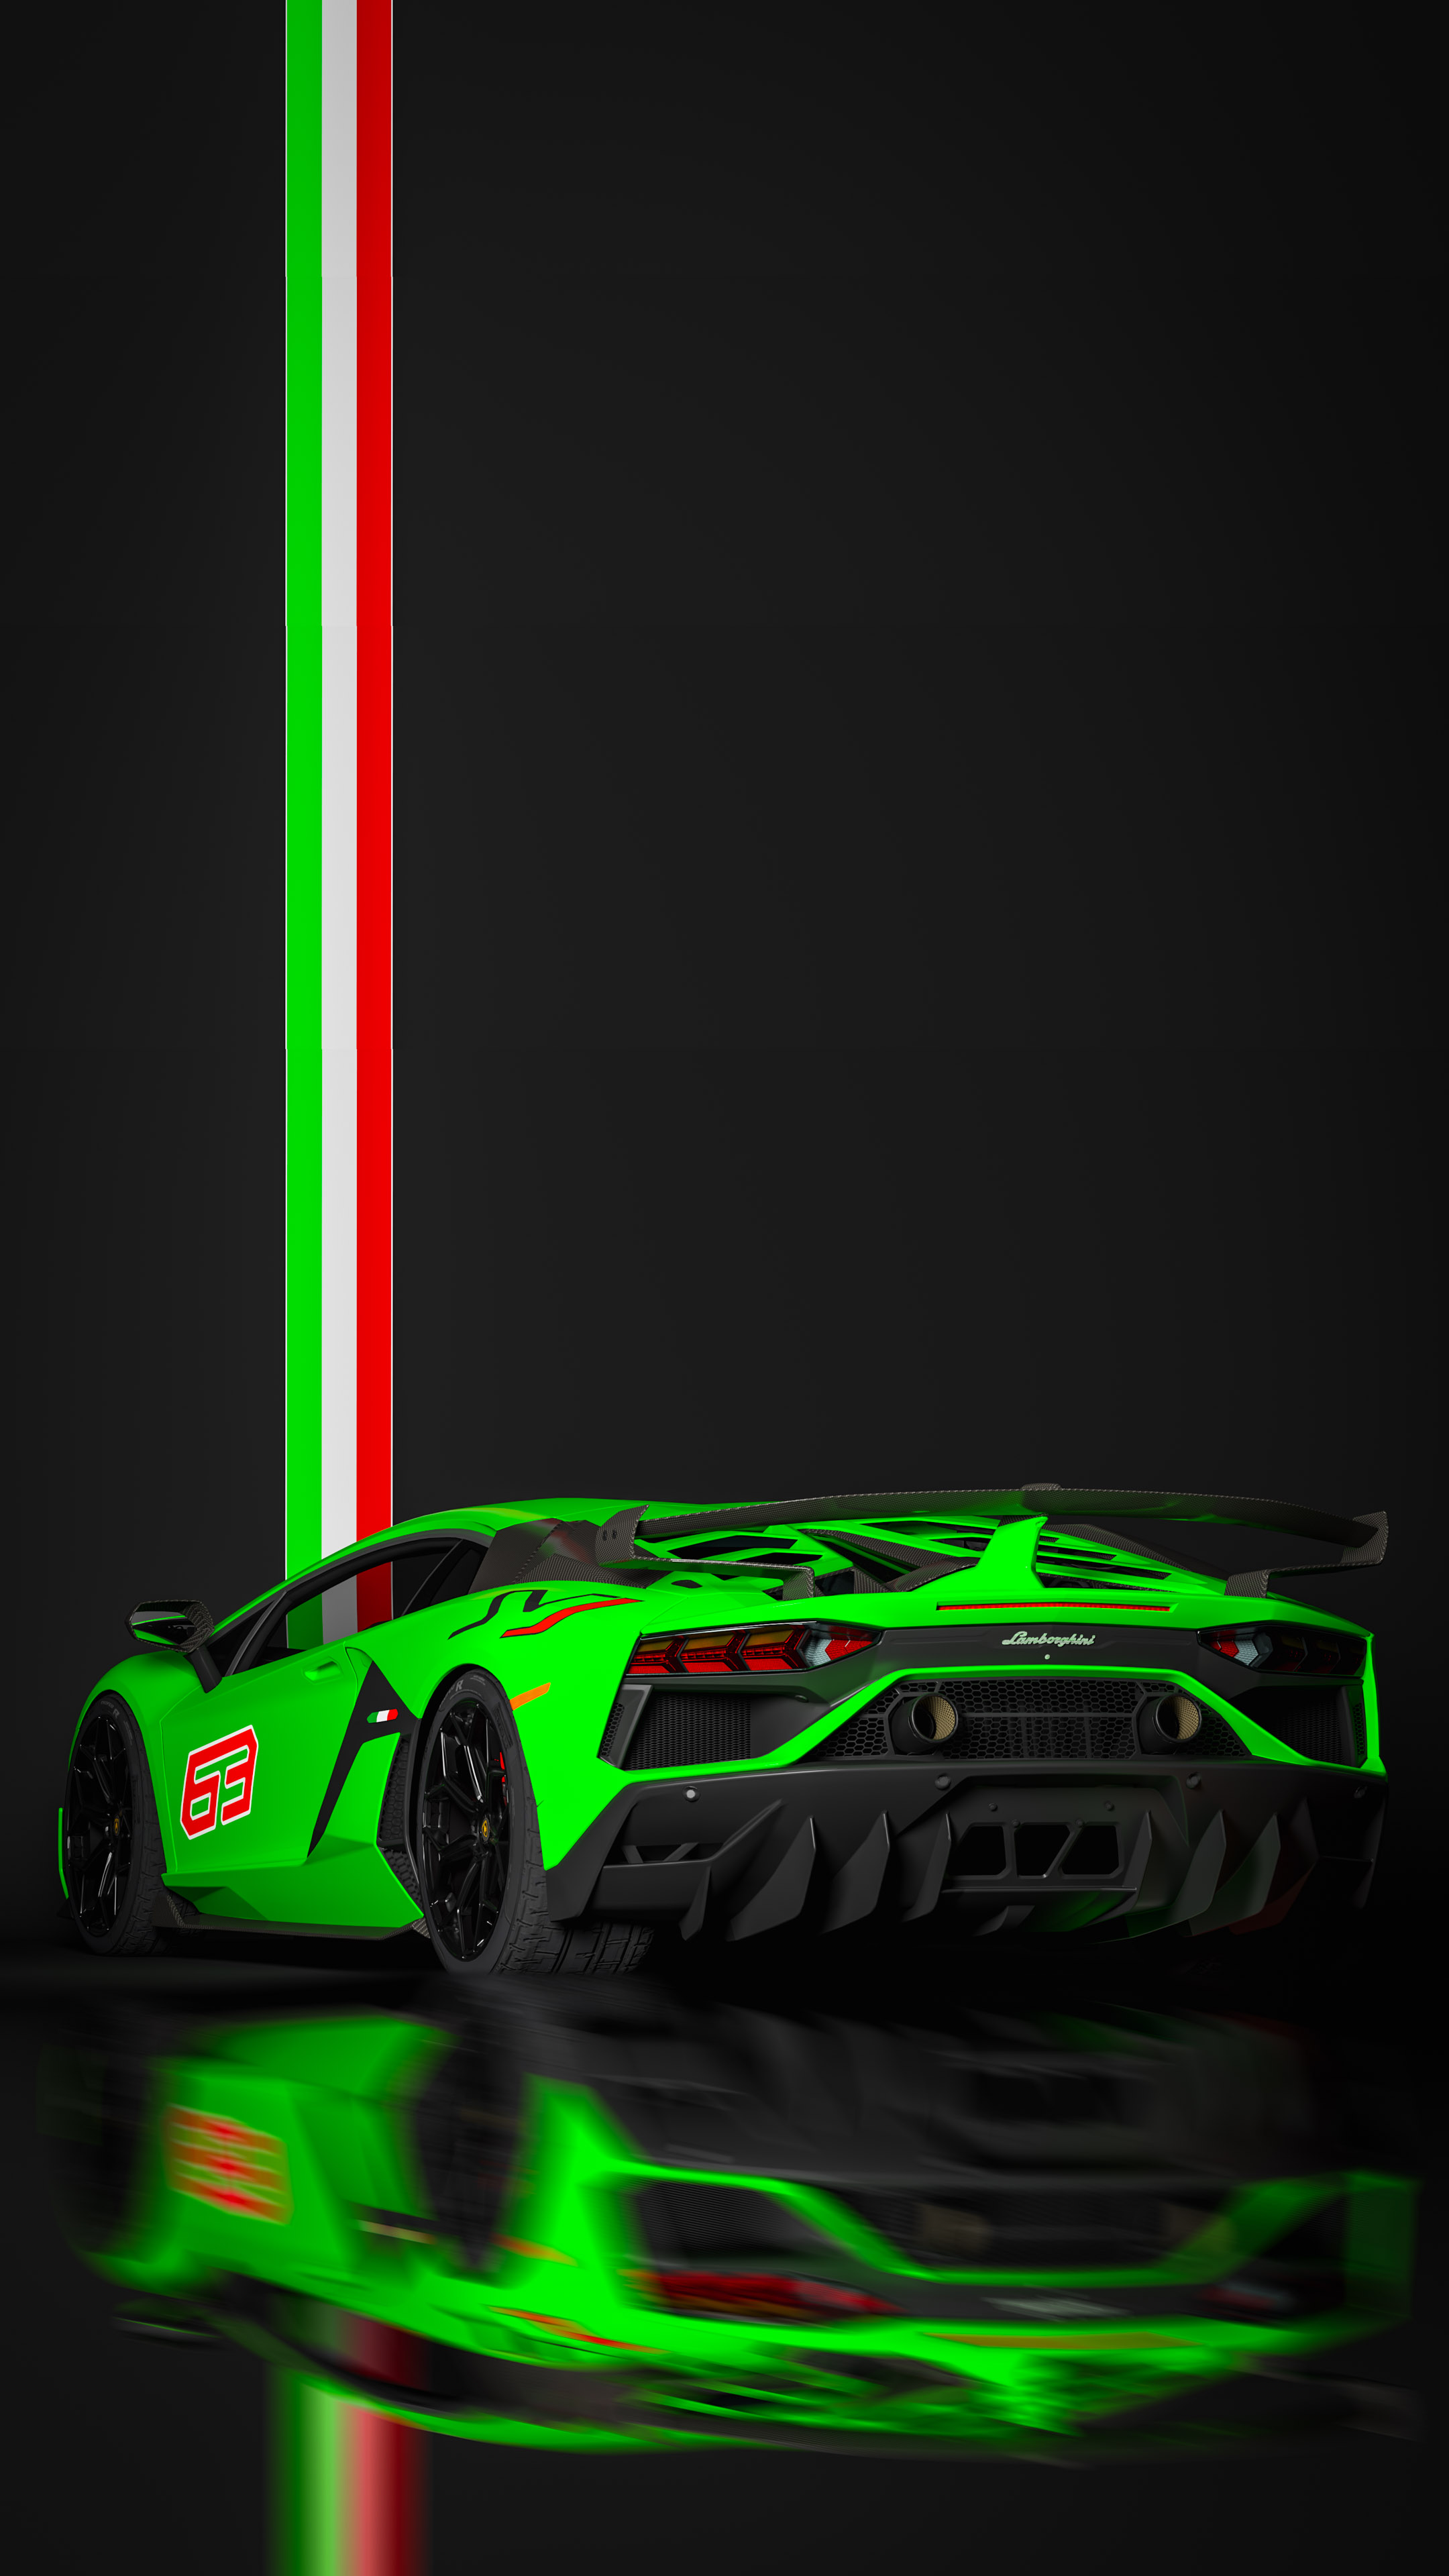 Elevate your visual experience with our Lamborghini Aventador SVJ car iPhone wallpaper, capturing the essence of Italian design and speed.